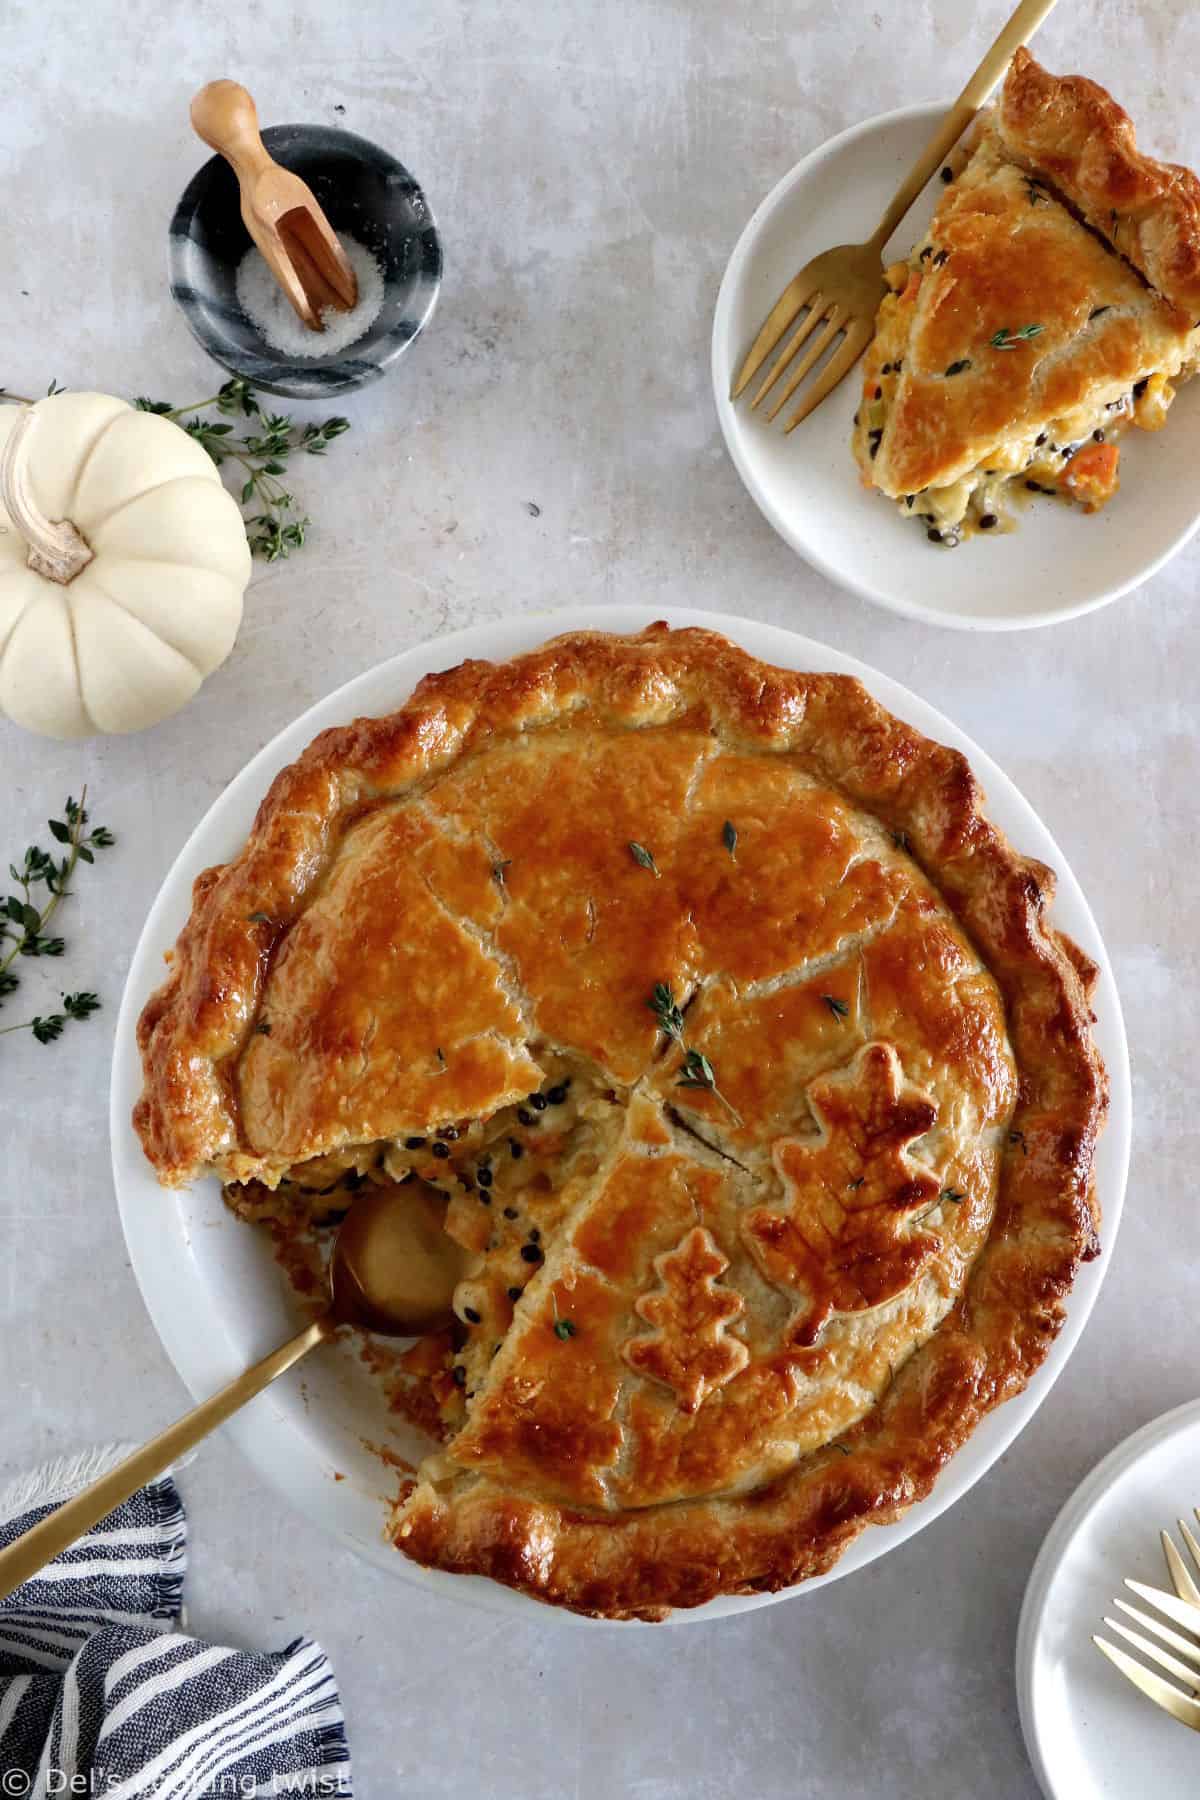 This butternut squash and lentil pot pie is prepared with a hearty and creamy vegetable filling, tucked into two homemade pie crusts.